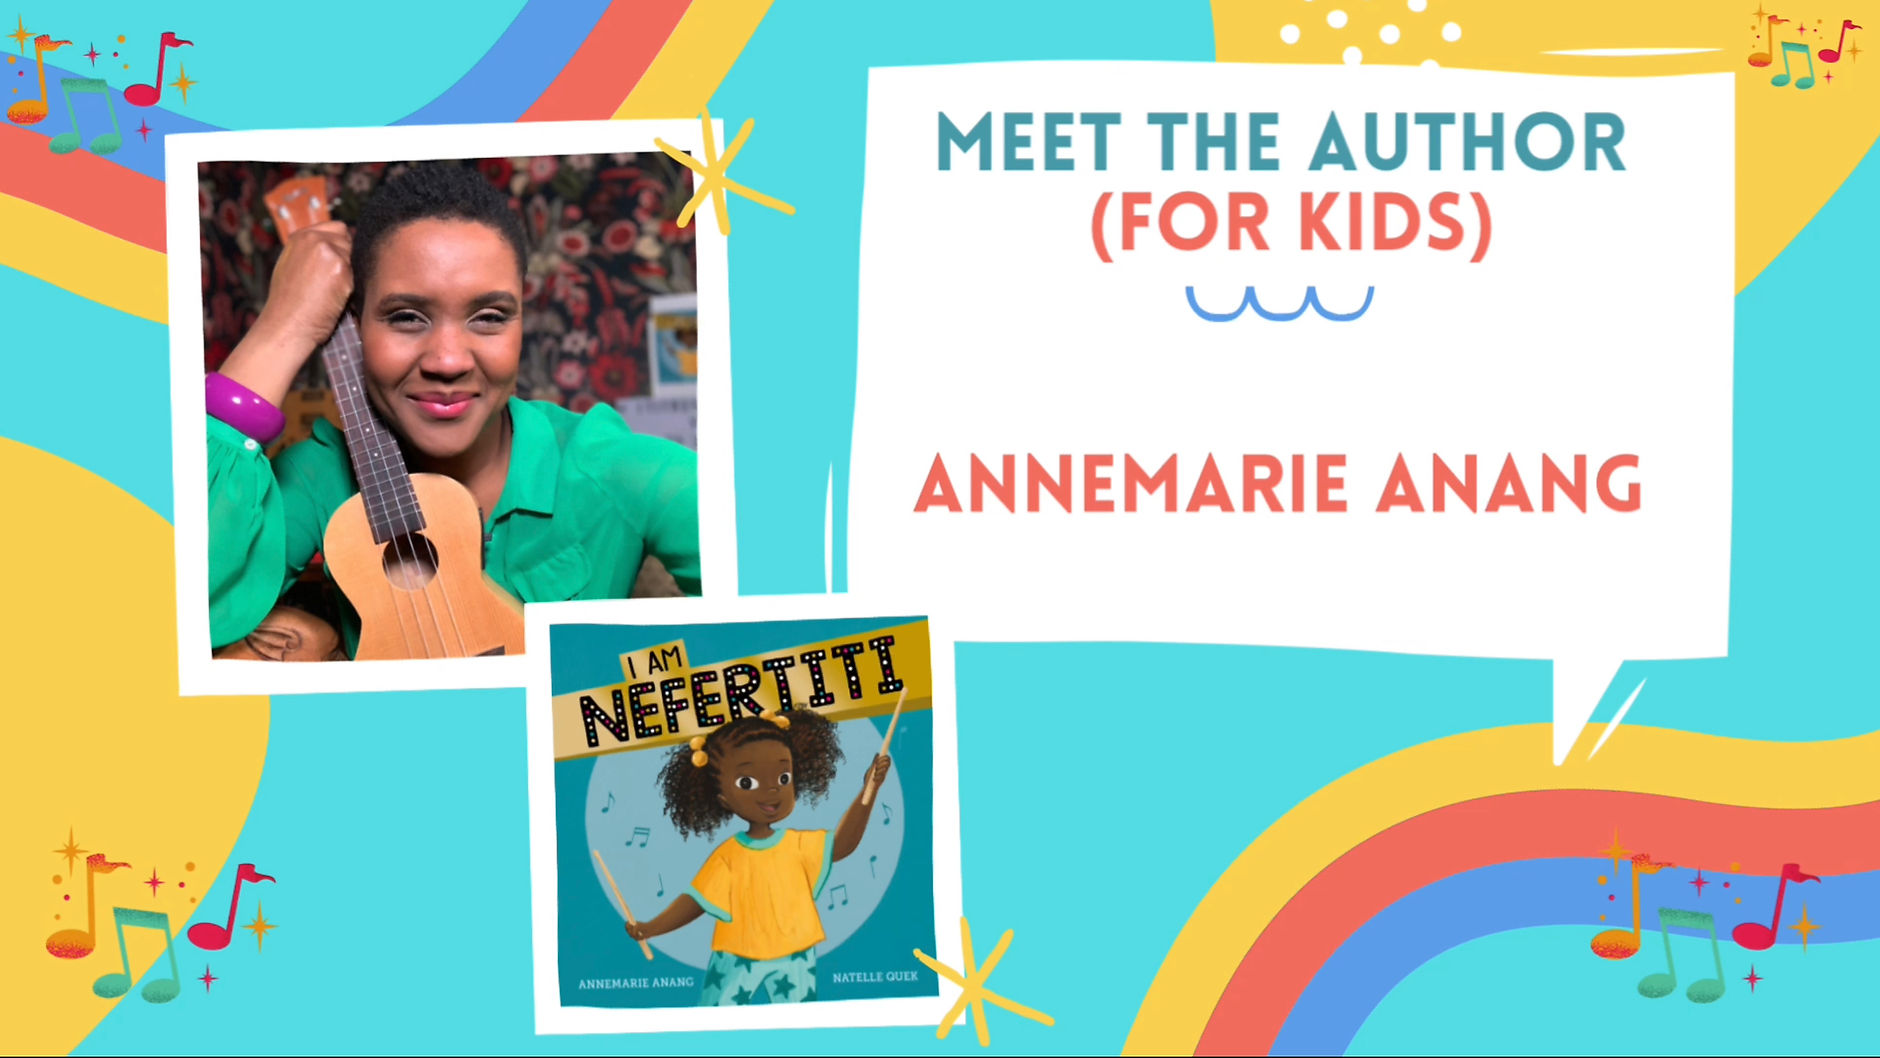 MEET THE AUTHOR FOR KIDS